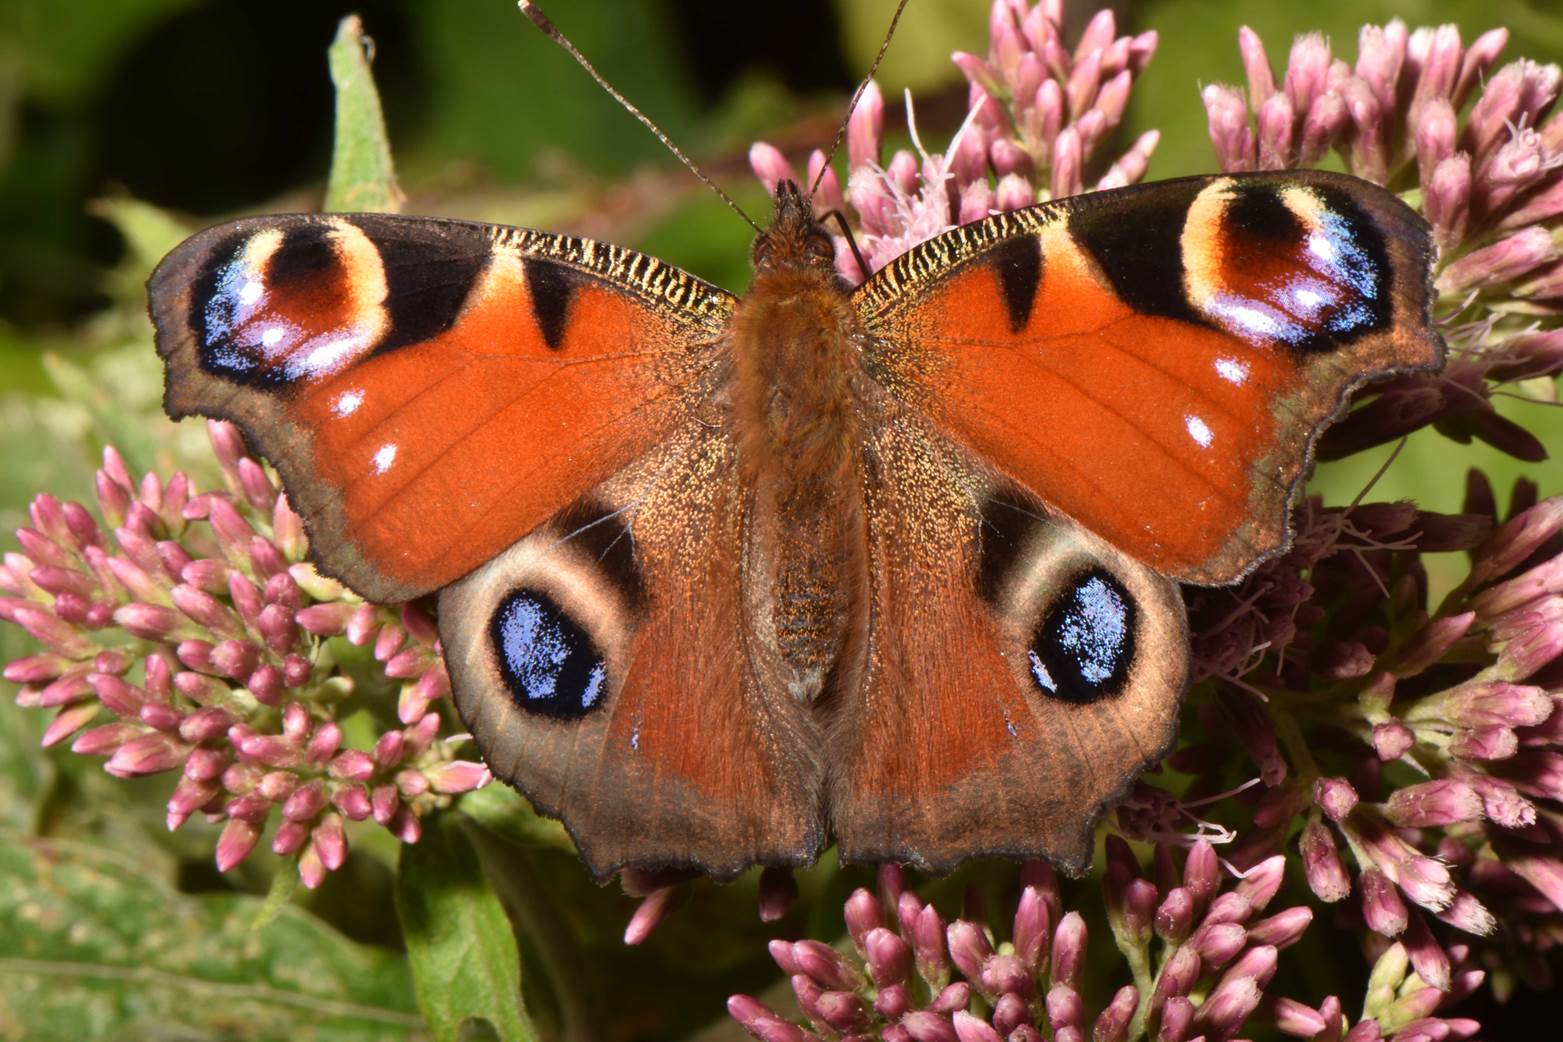 A close up of a butterfly

Description automatically generated with medium confidence